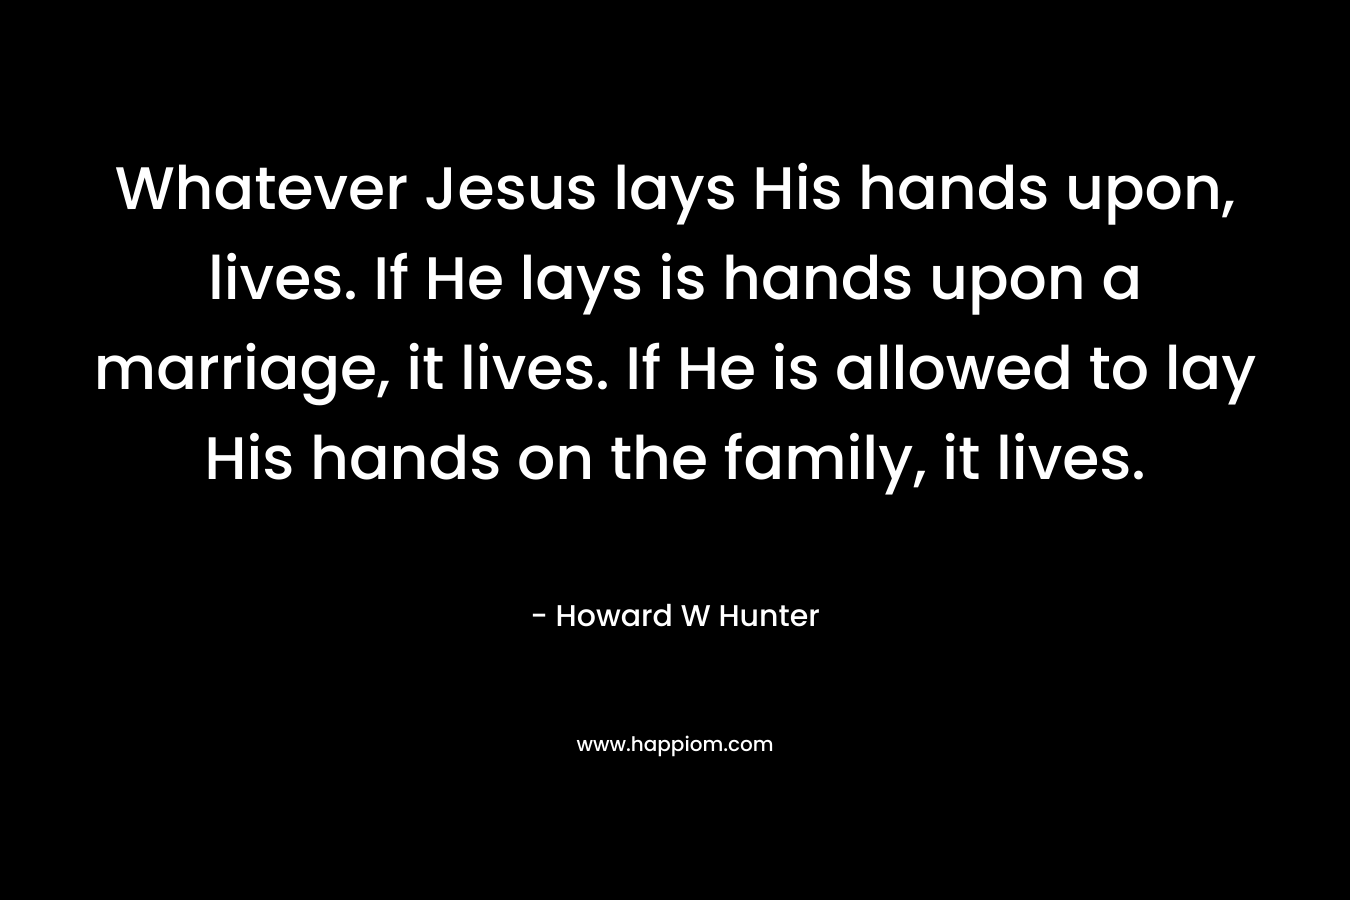 Whatever Jesus lays His hands upon, lives. If He lays is hands upon a marriage, it lives. If He is allowed to lay His hands on the family, it lives.